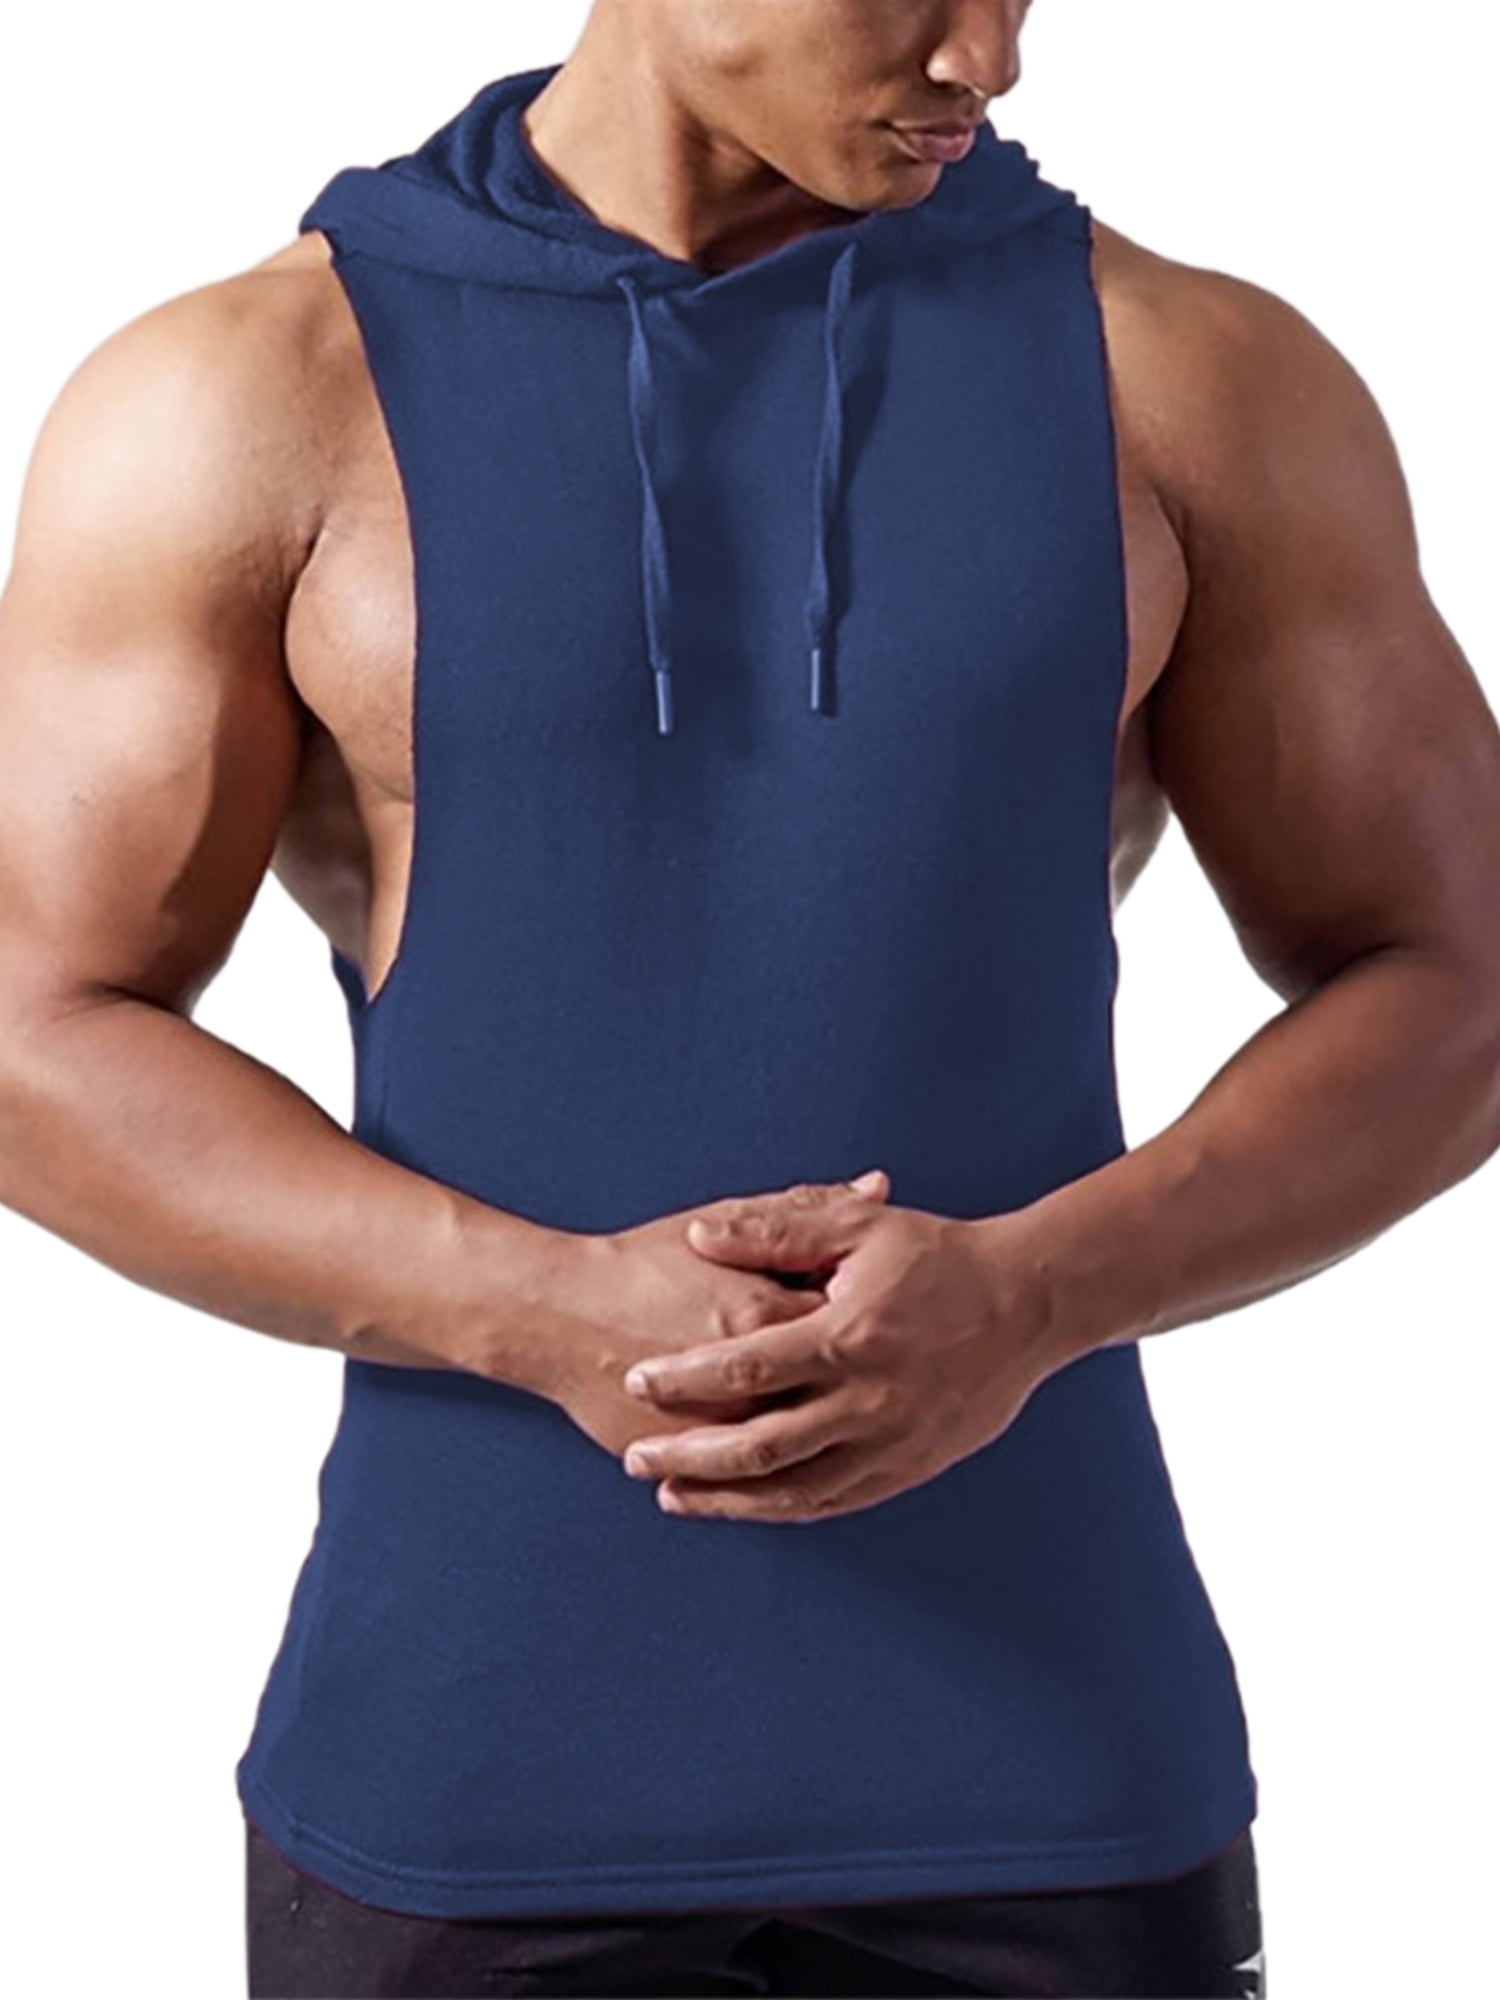 Men's Workout Sleeveless Hoodies Athletic Training Cotton Gym Hooded Tank Tops Sports Bodybuilding Fitness Muscle T Shirts 